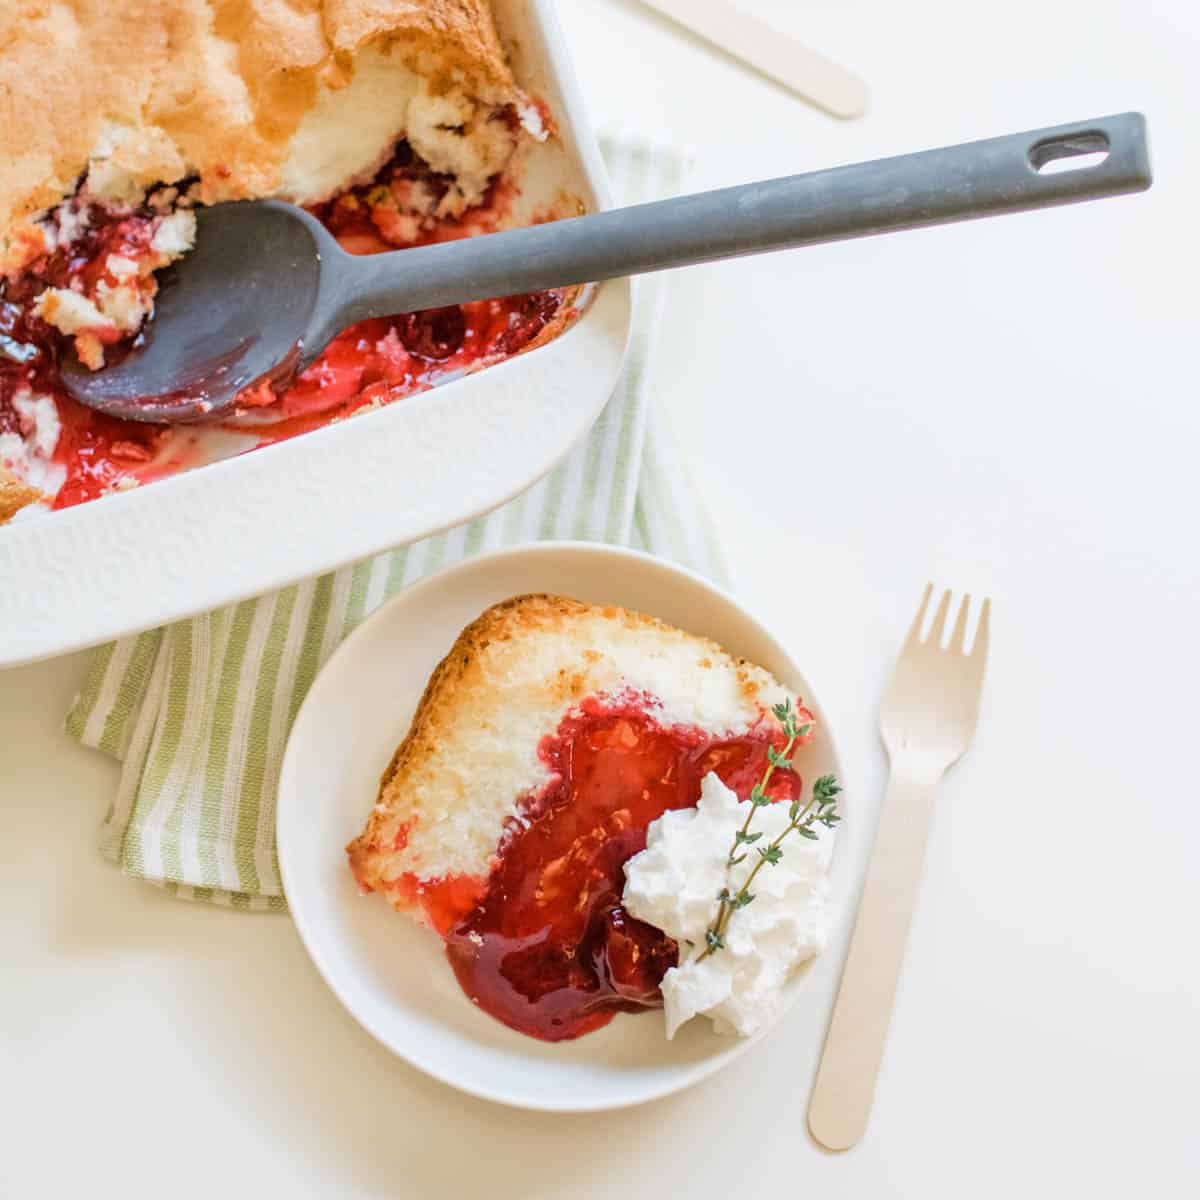 Strawberry shortcake dump cake in a baking dish with a white dessert plate and serving of the cake.